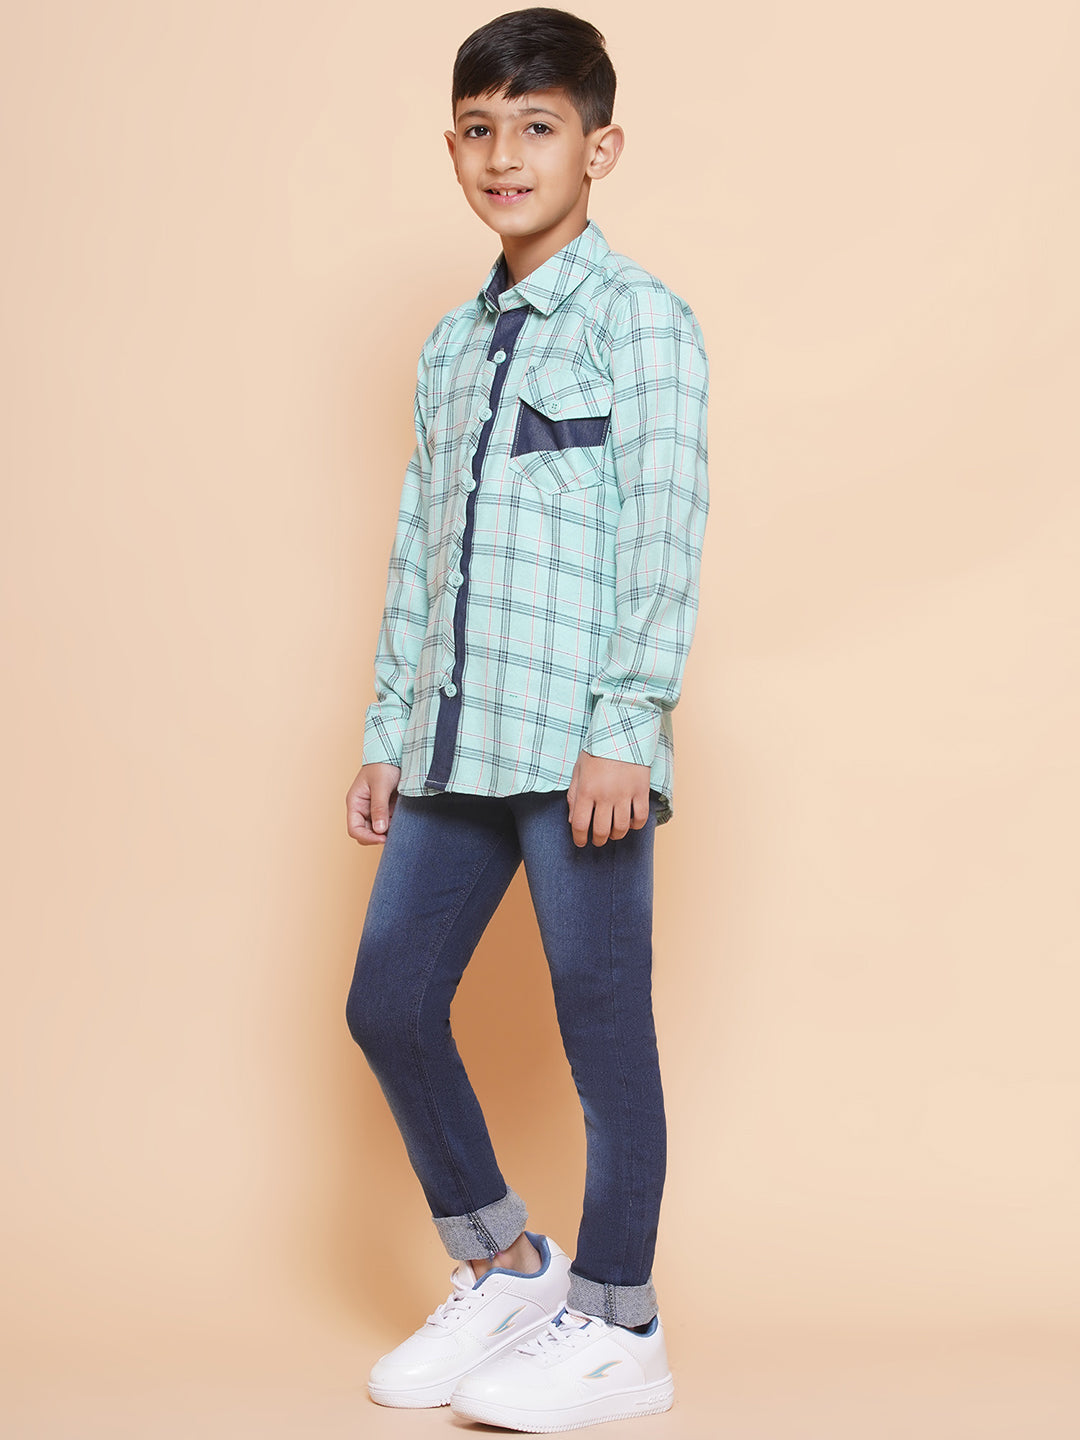 Kids Blue Shirt and Jeans Clothing Set For Boys